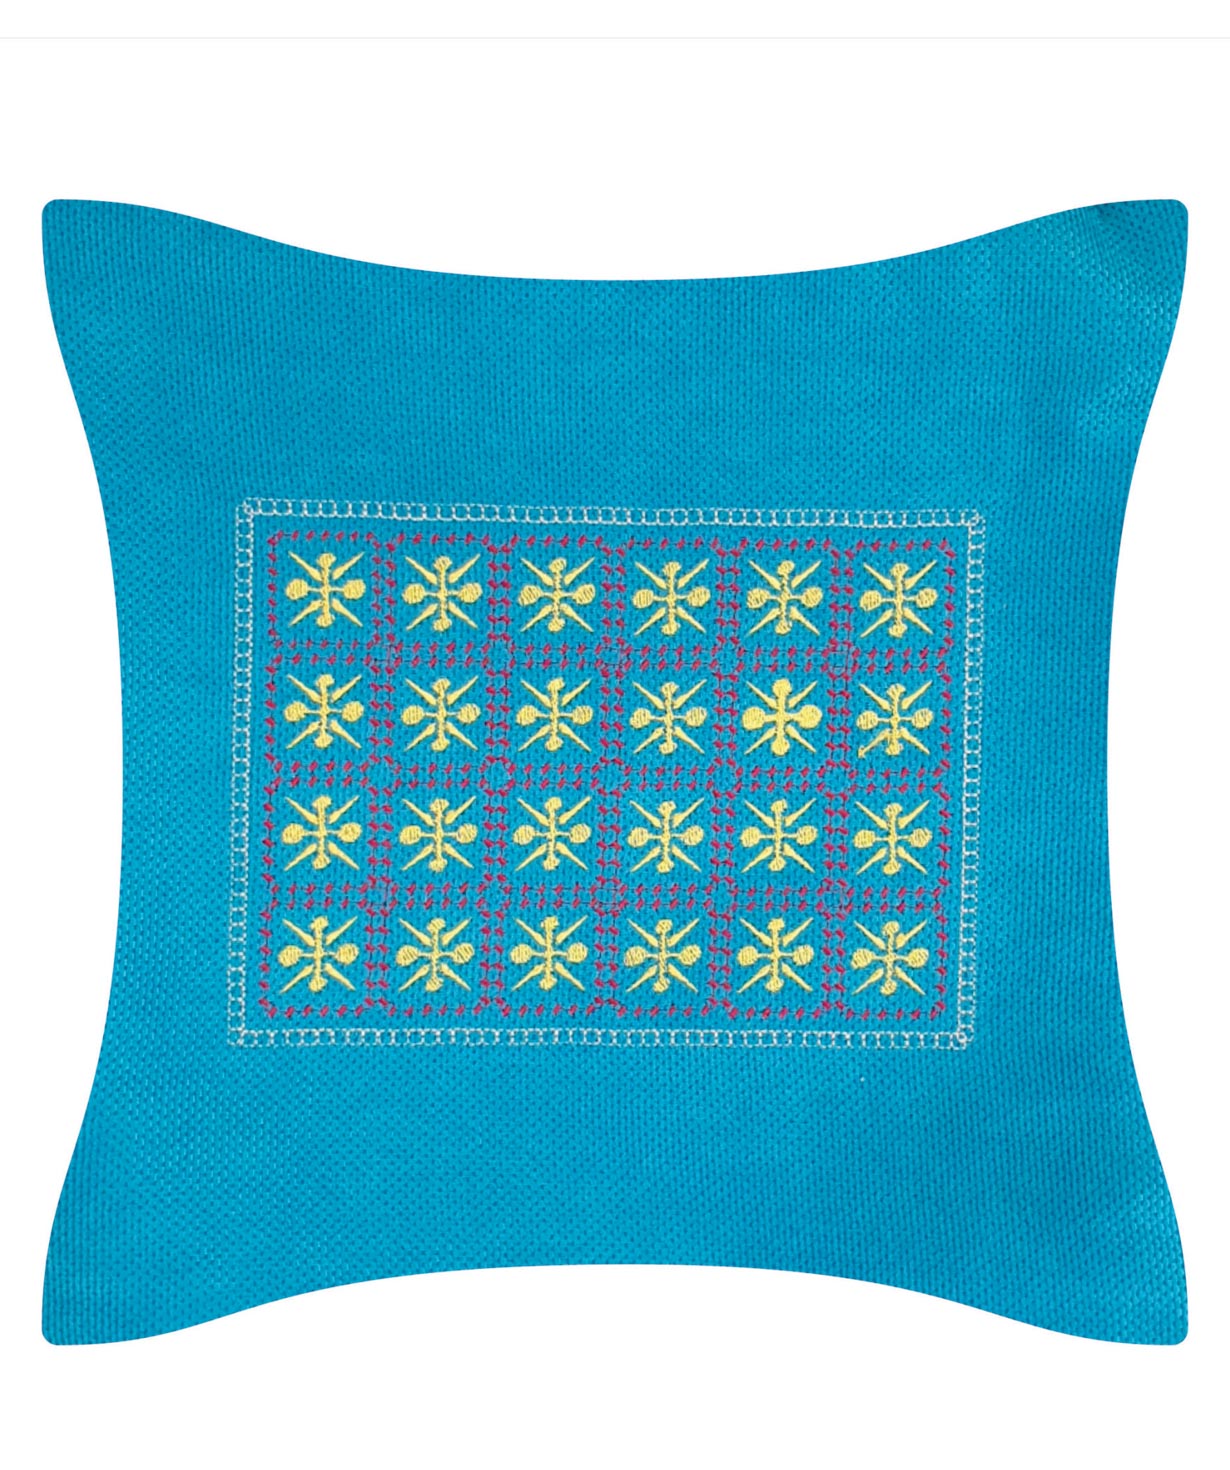 Pillow `Miskaryan heritage` embroidered with Armenian ornament №36